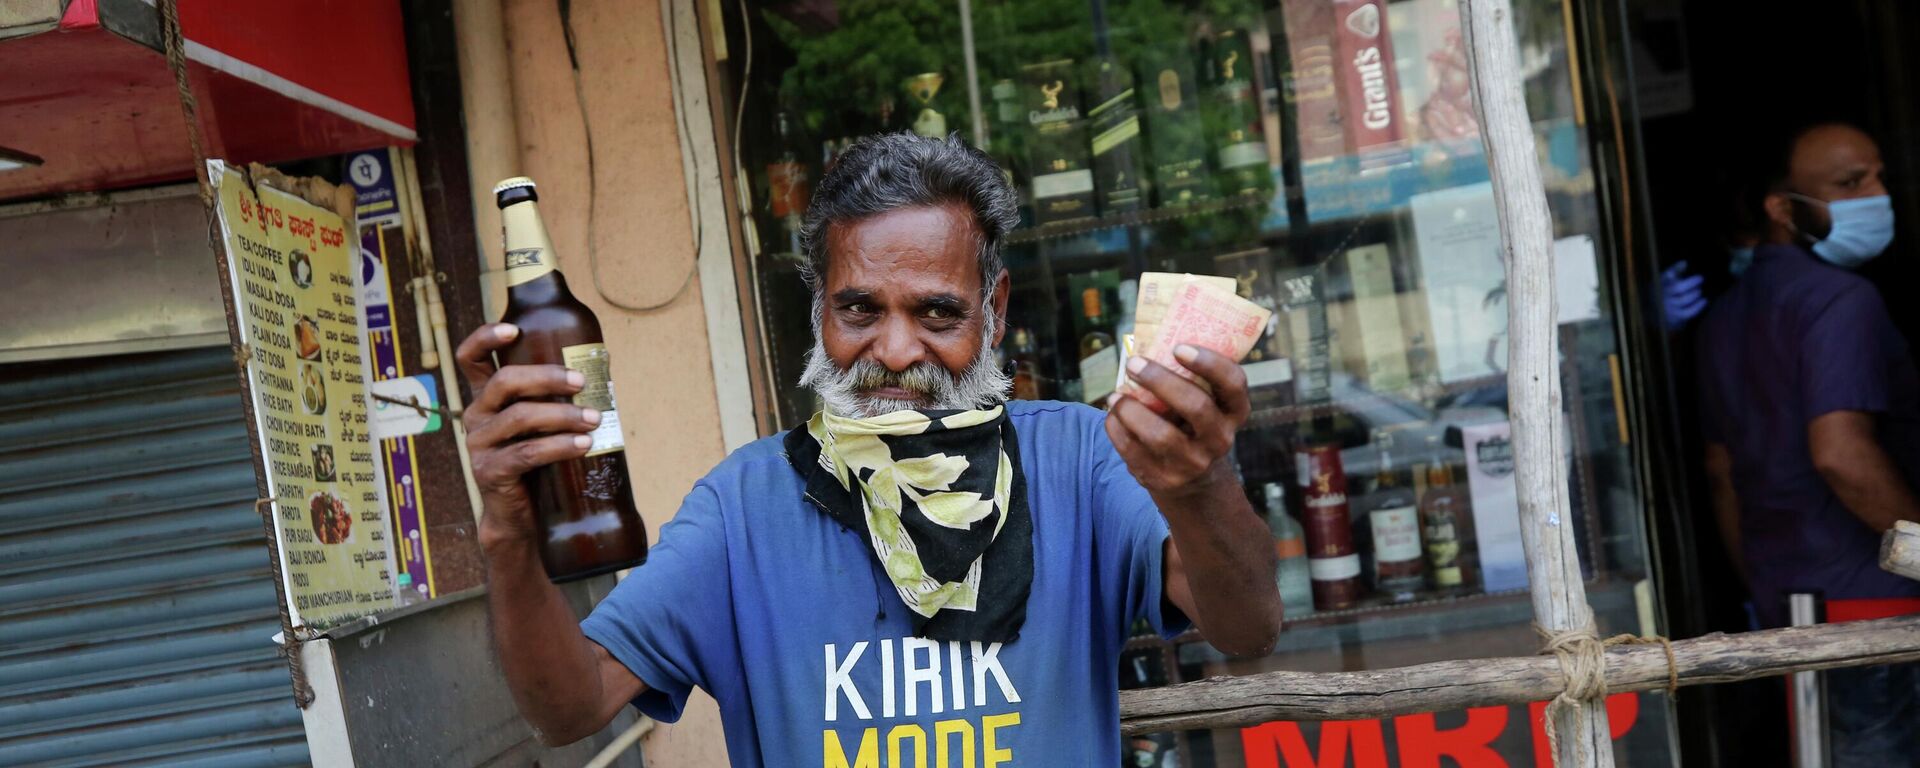 An Indian man reacts in joy after buying a bottle of liquor from an outlet during a lockdown to curb the spread of new coronavirus, in Bangalore, India, Wednesday, May 6, 2020 - Sputnik International, 1920, 16.09.2022